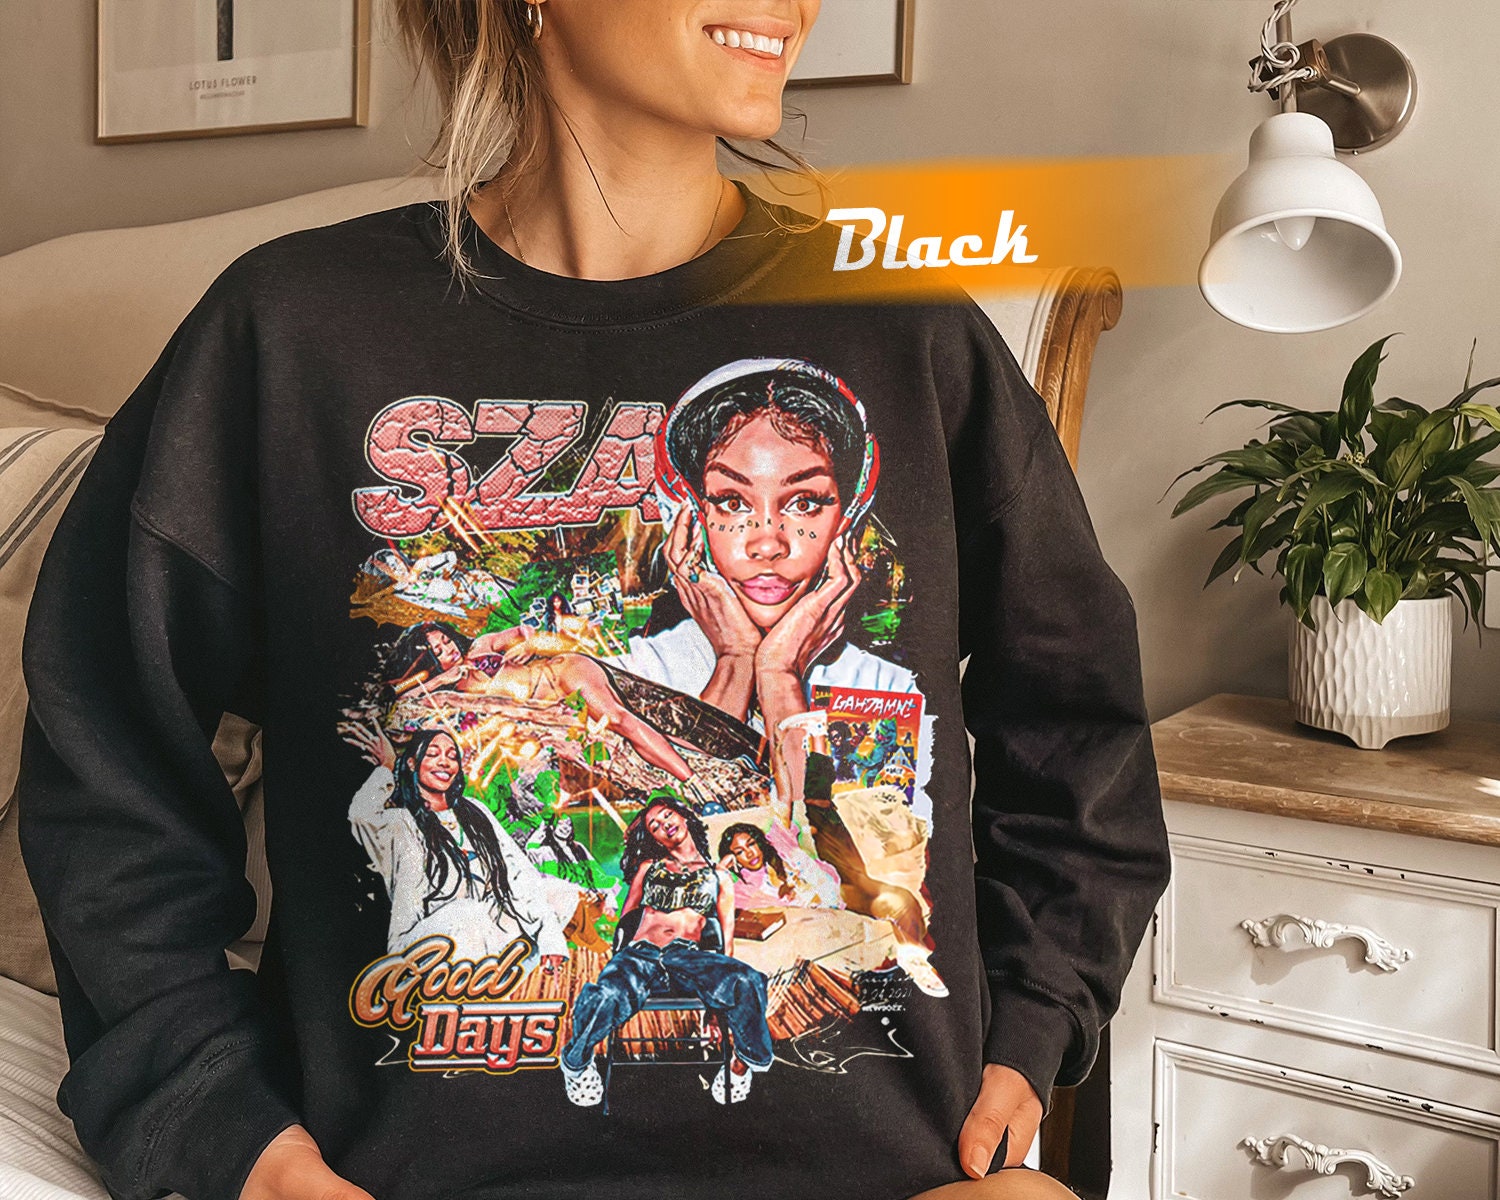 Find Your Inner Groove with SZA Merchandise Collection